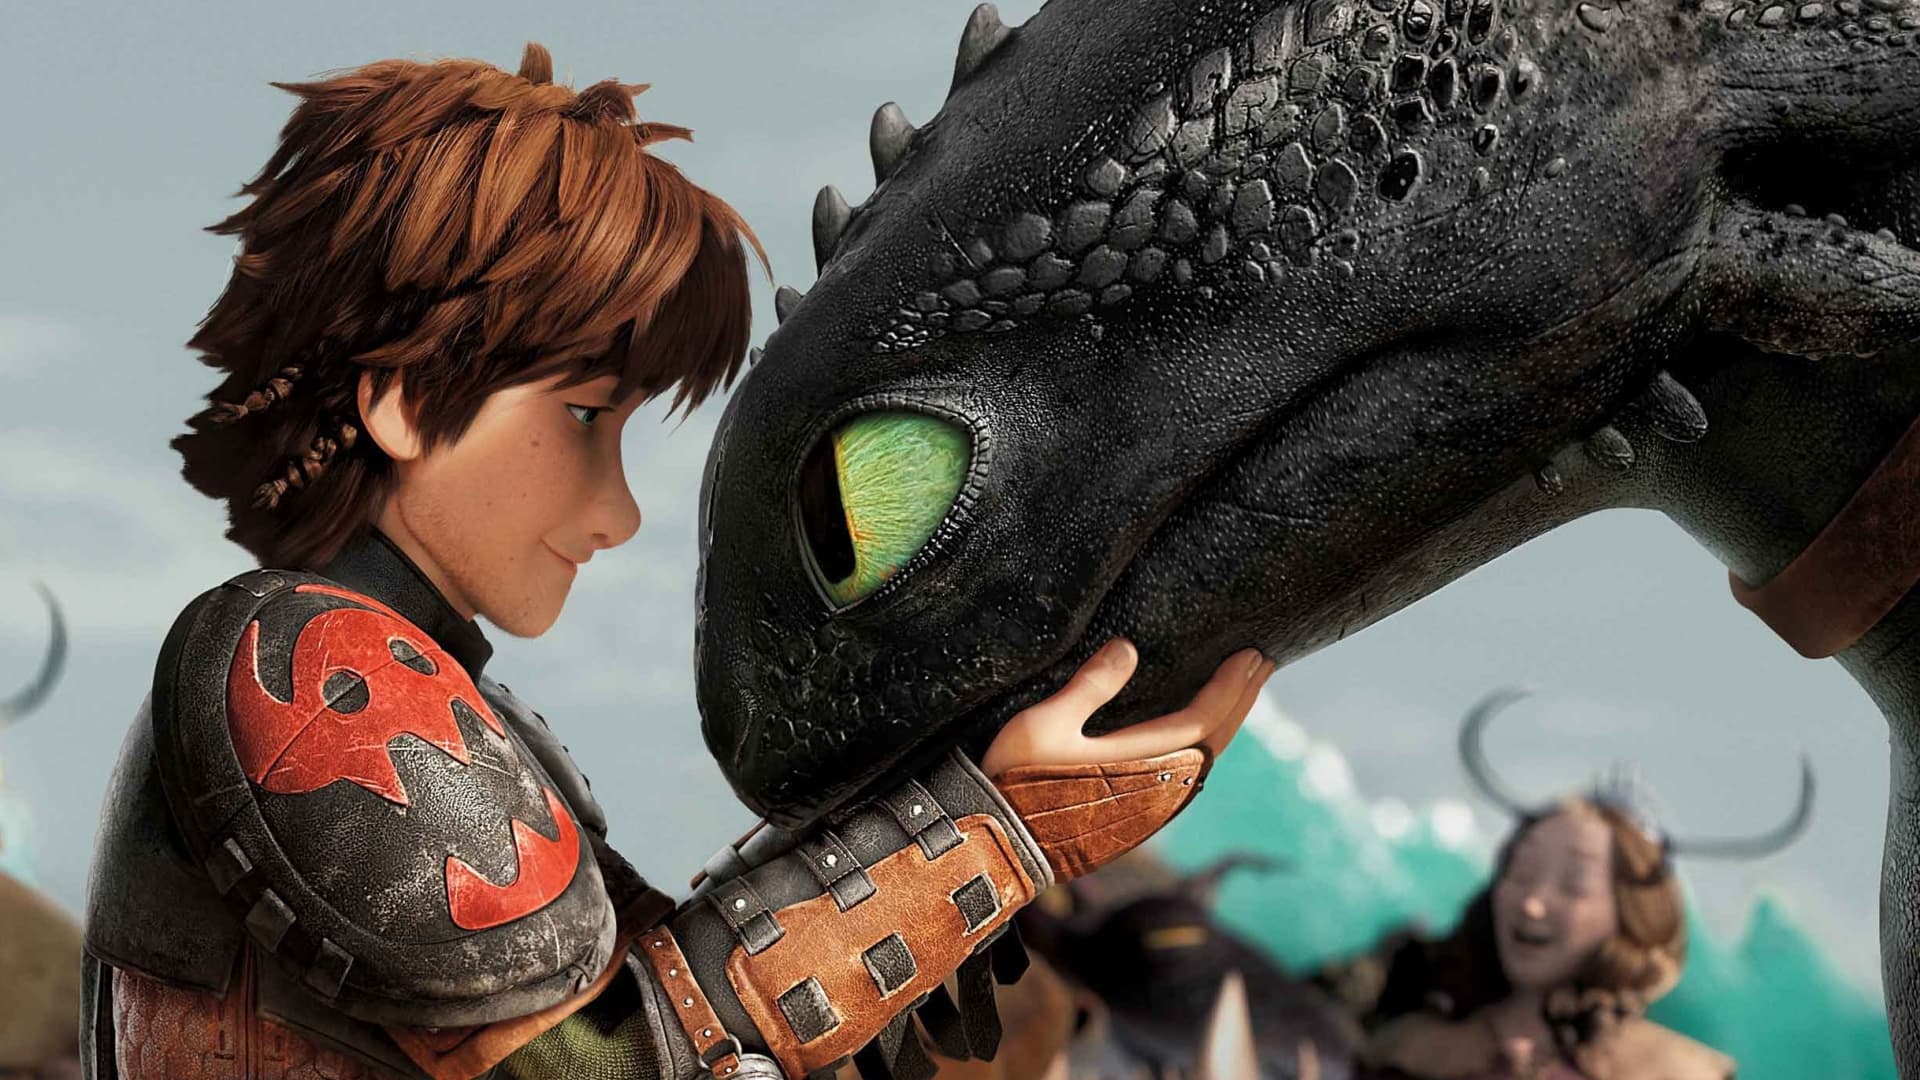 Why is Universal making a live-action ‘How to Train Your Dragon’? These charts may explain